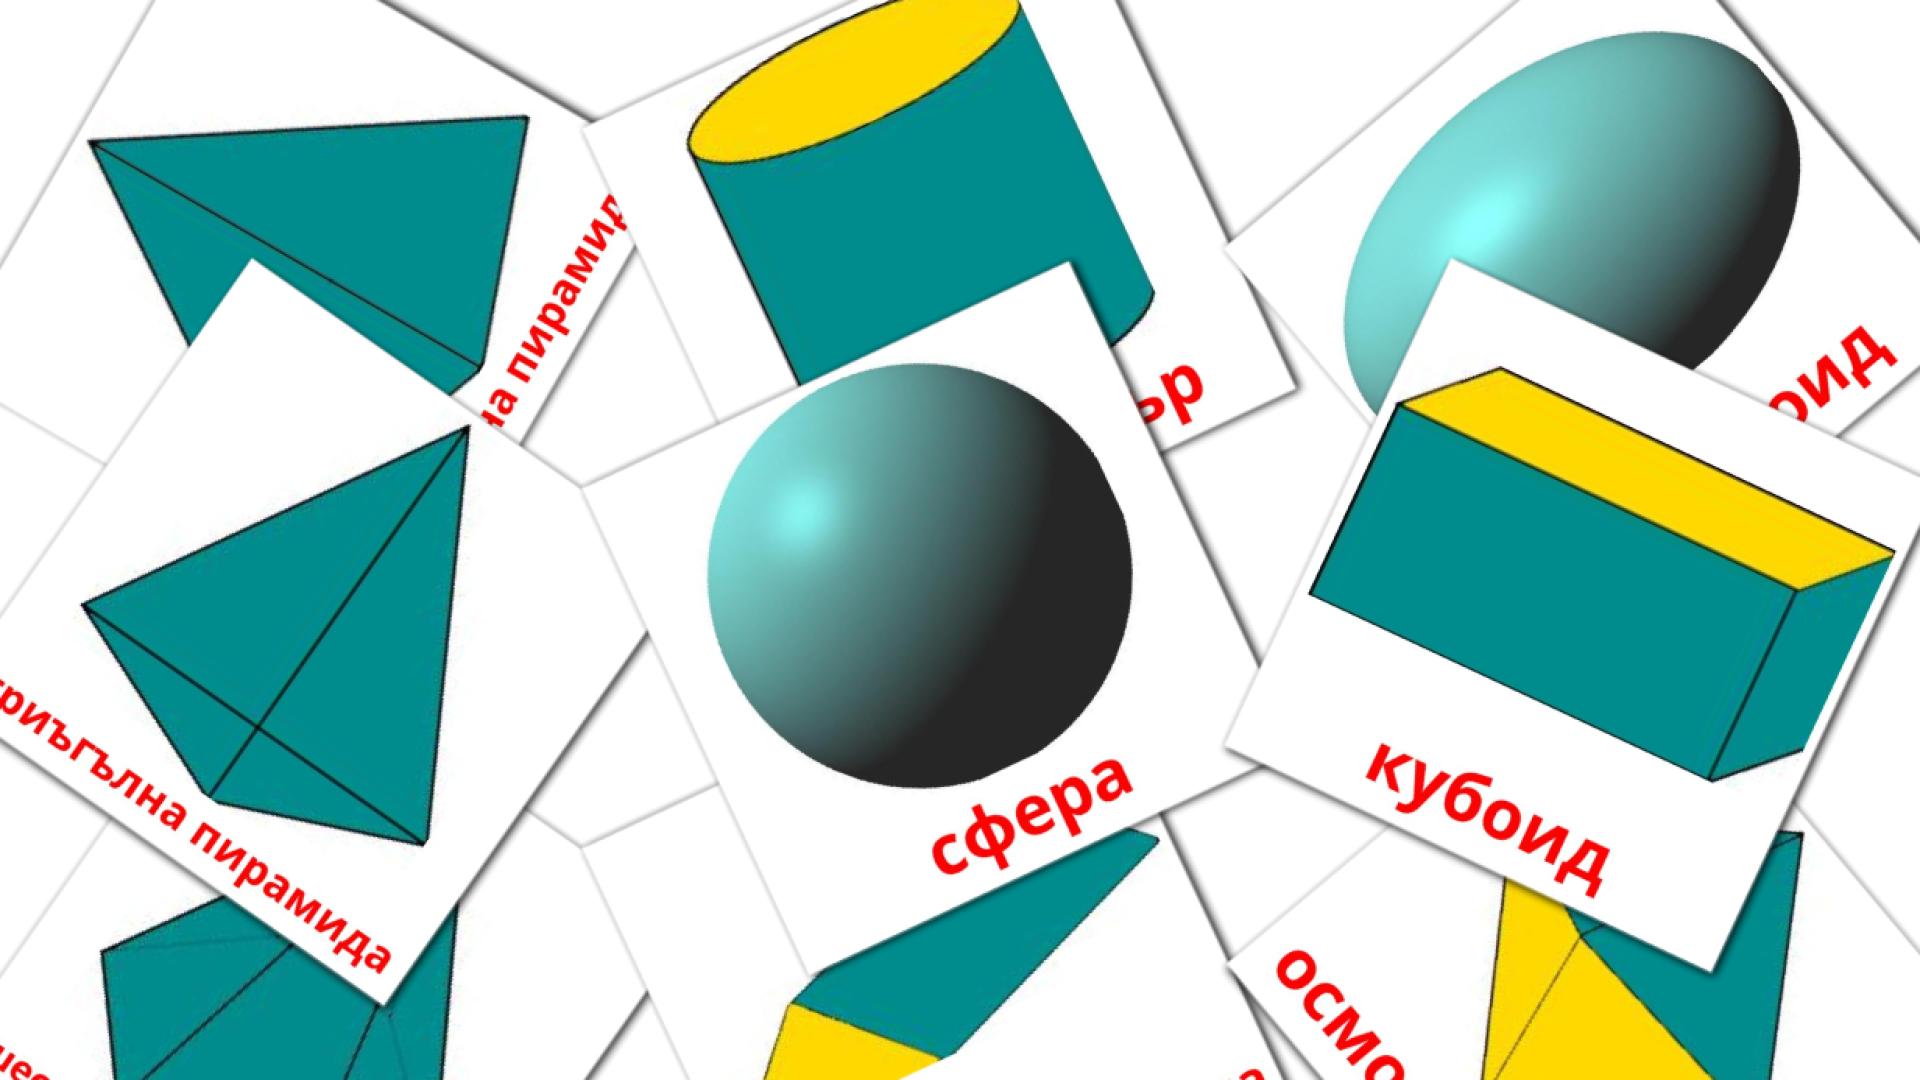 3D Shapes - bulgarian vocabulary cards